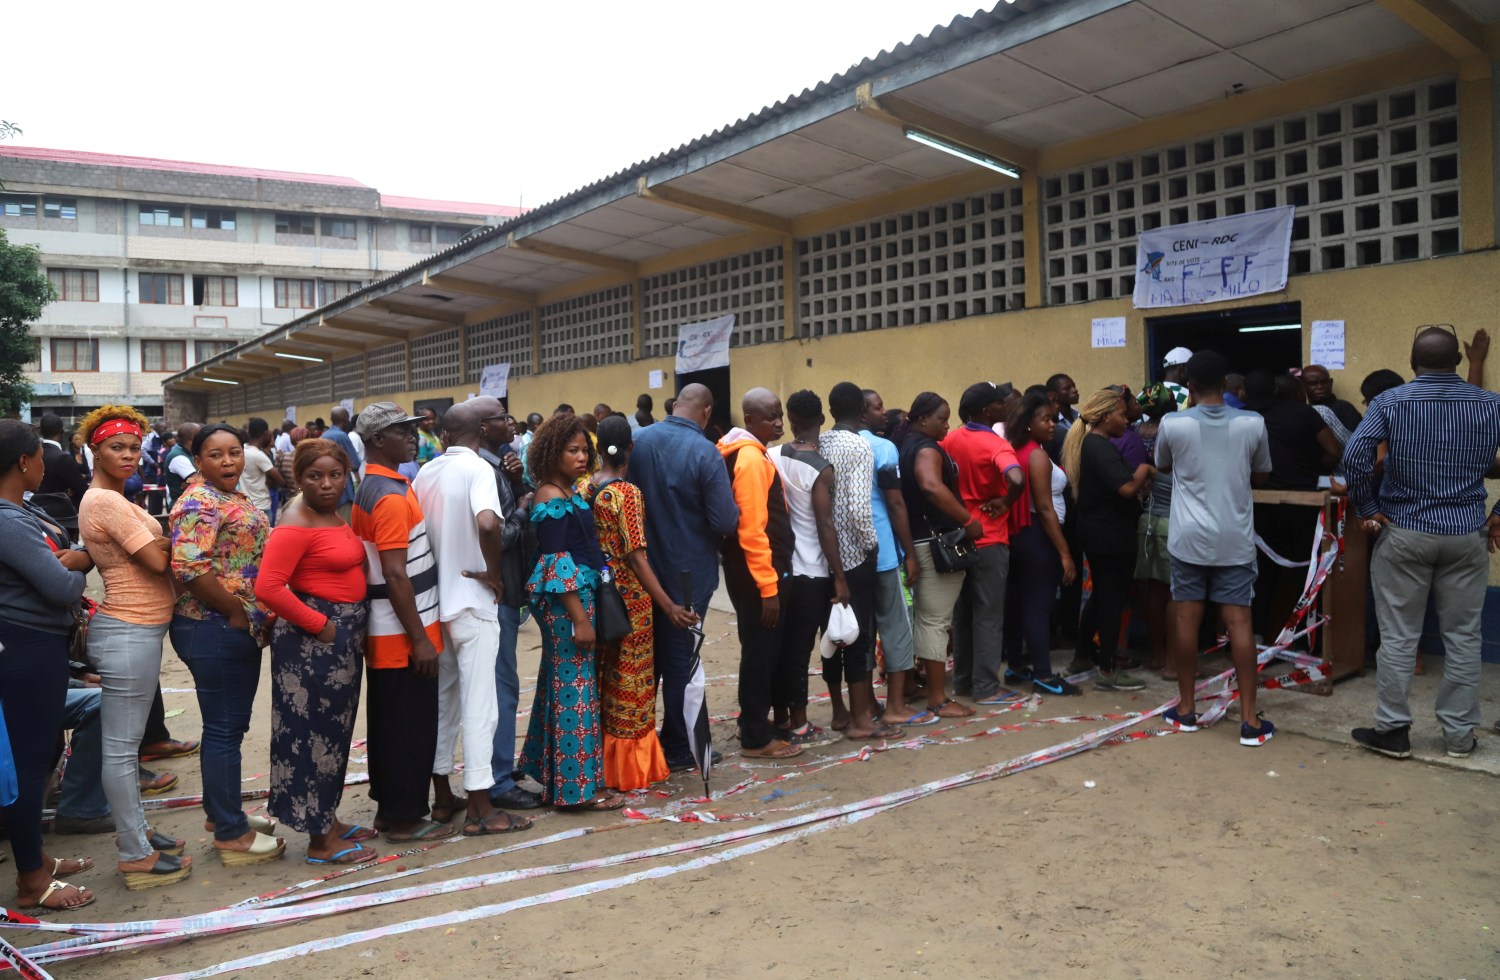 Voters queue outside a polling centre before casting their ballots in Kinshasa, Democratic Republic of Congo, December 30, 2018. REUTERS/Kenny Katombe - RC129A38C790